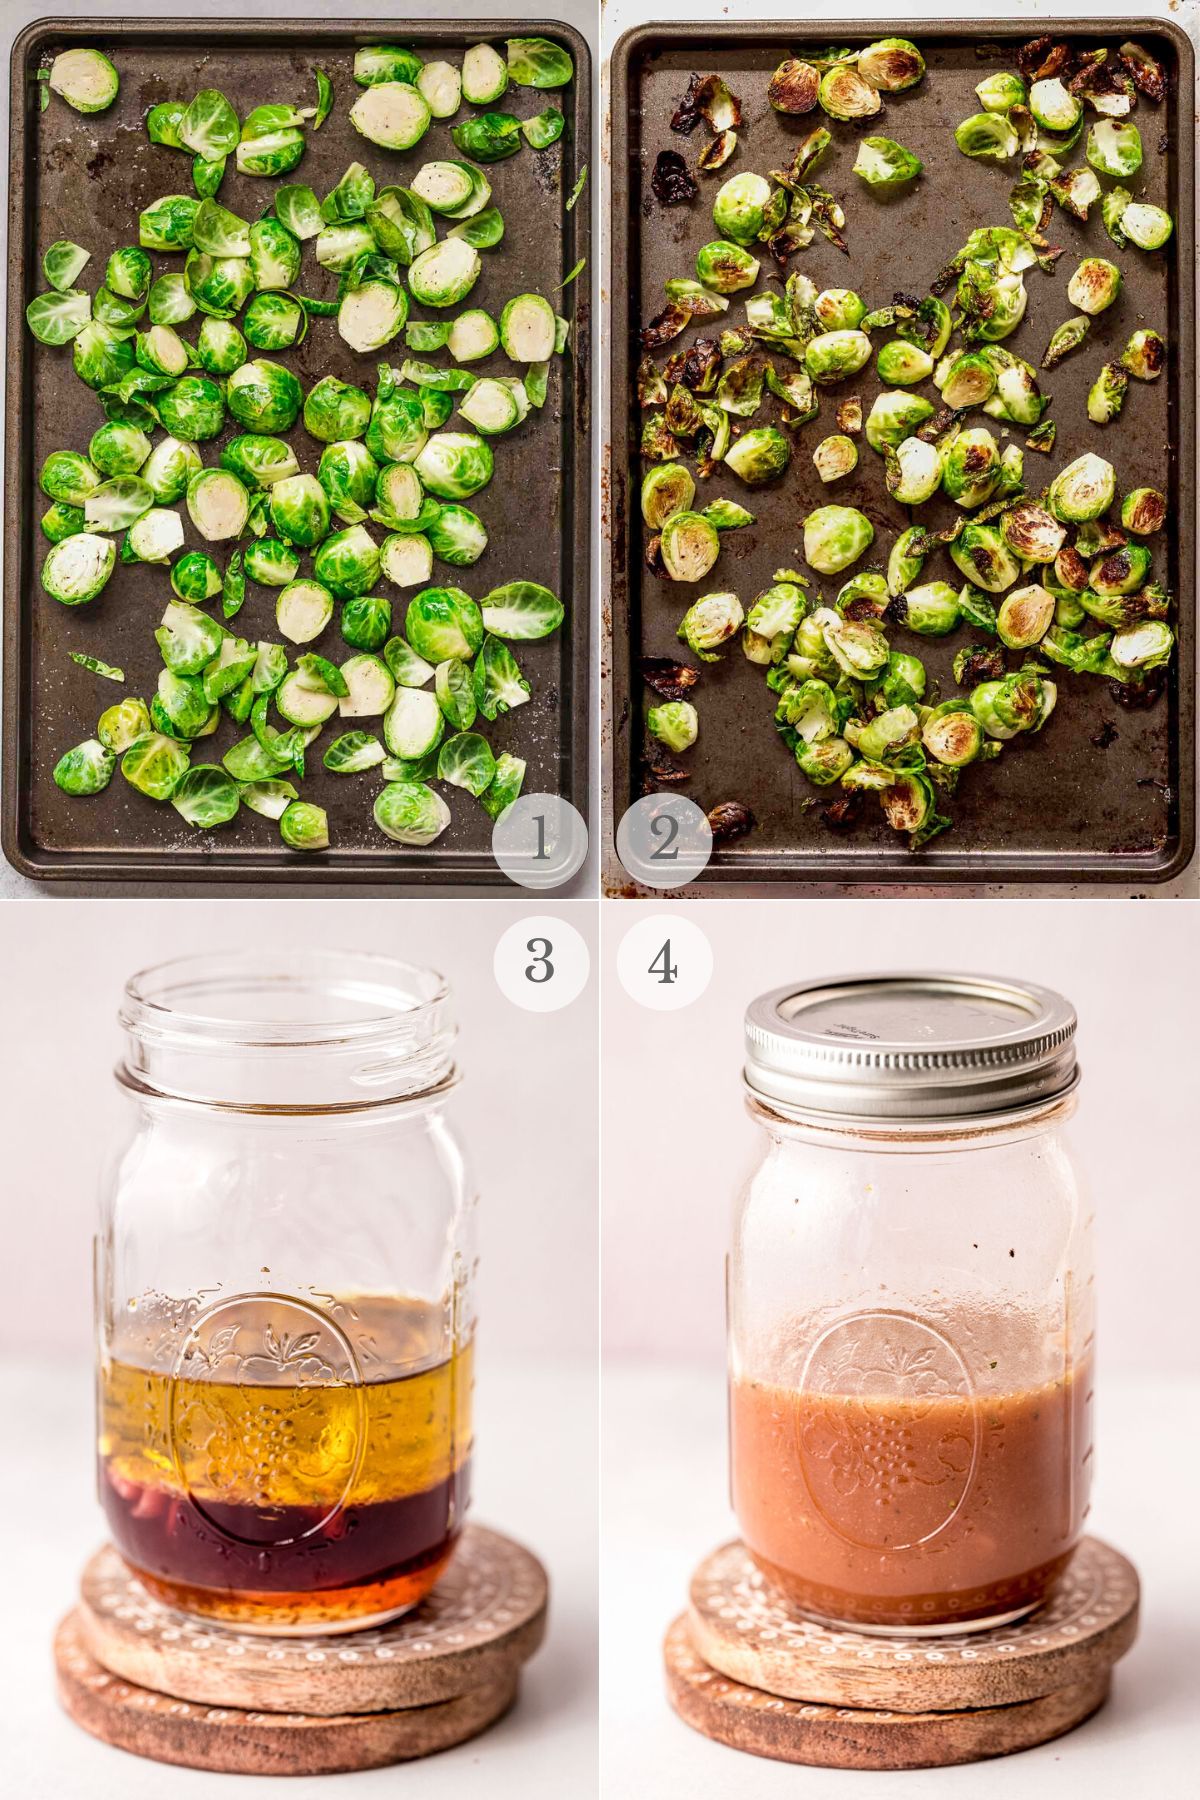 roasted brussels sprouts salad recipe steps 1-4.